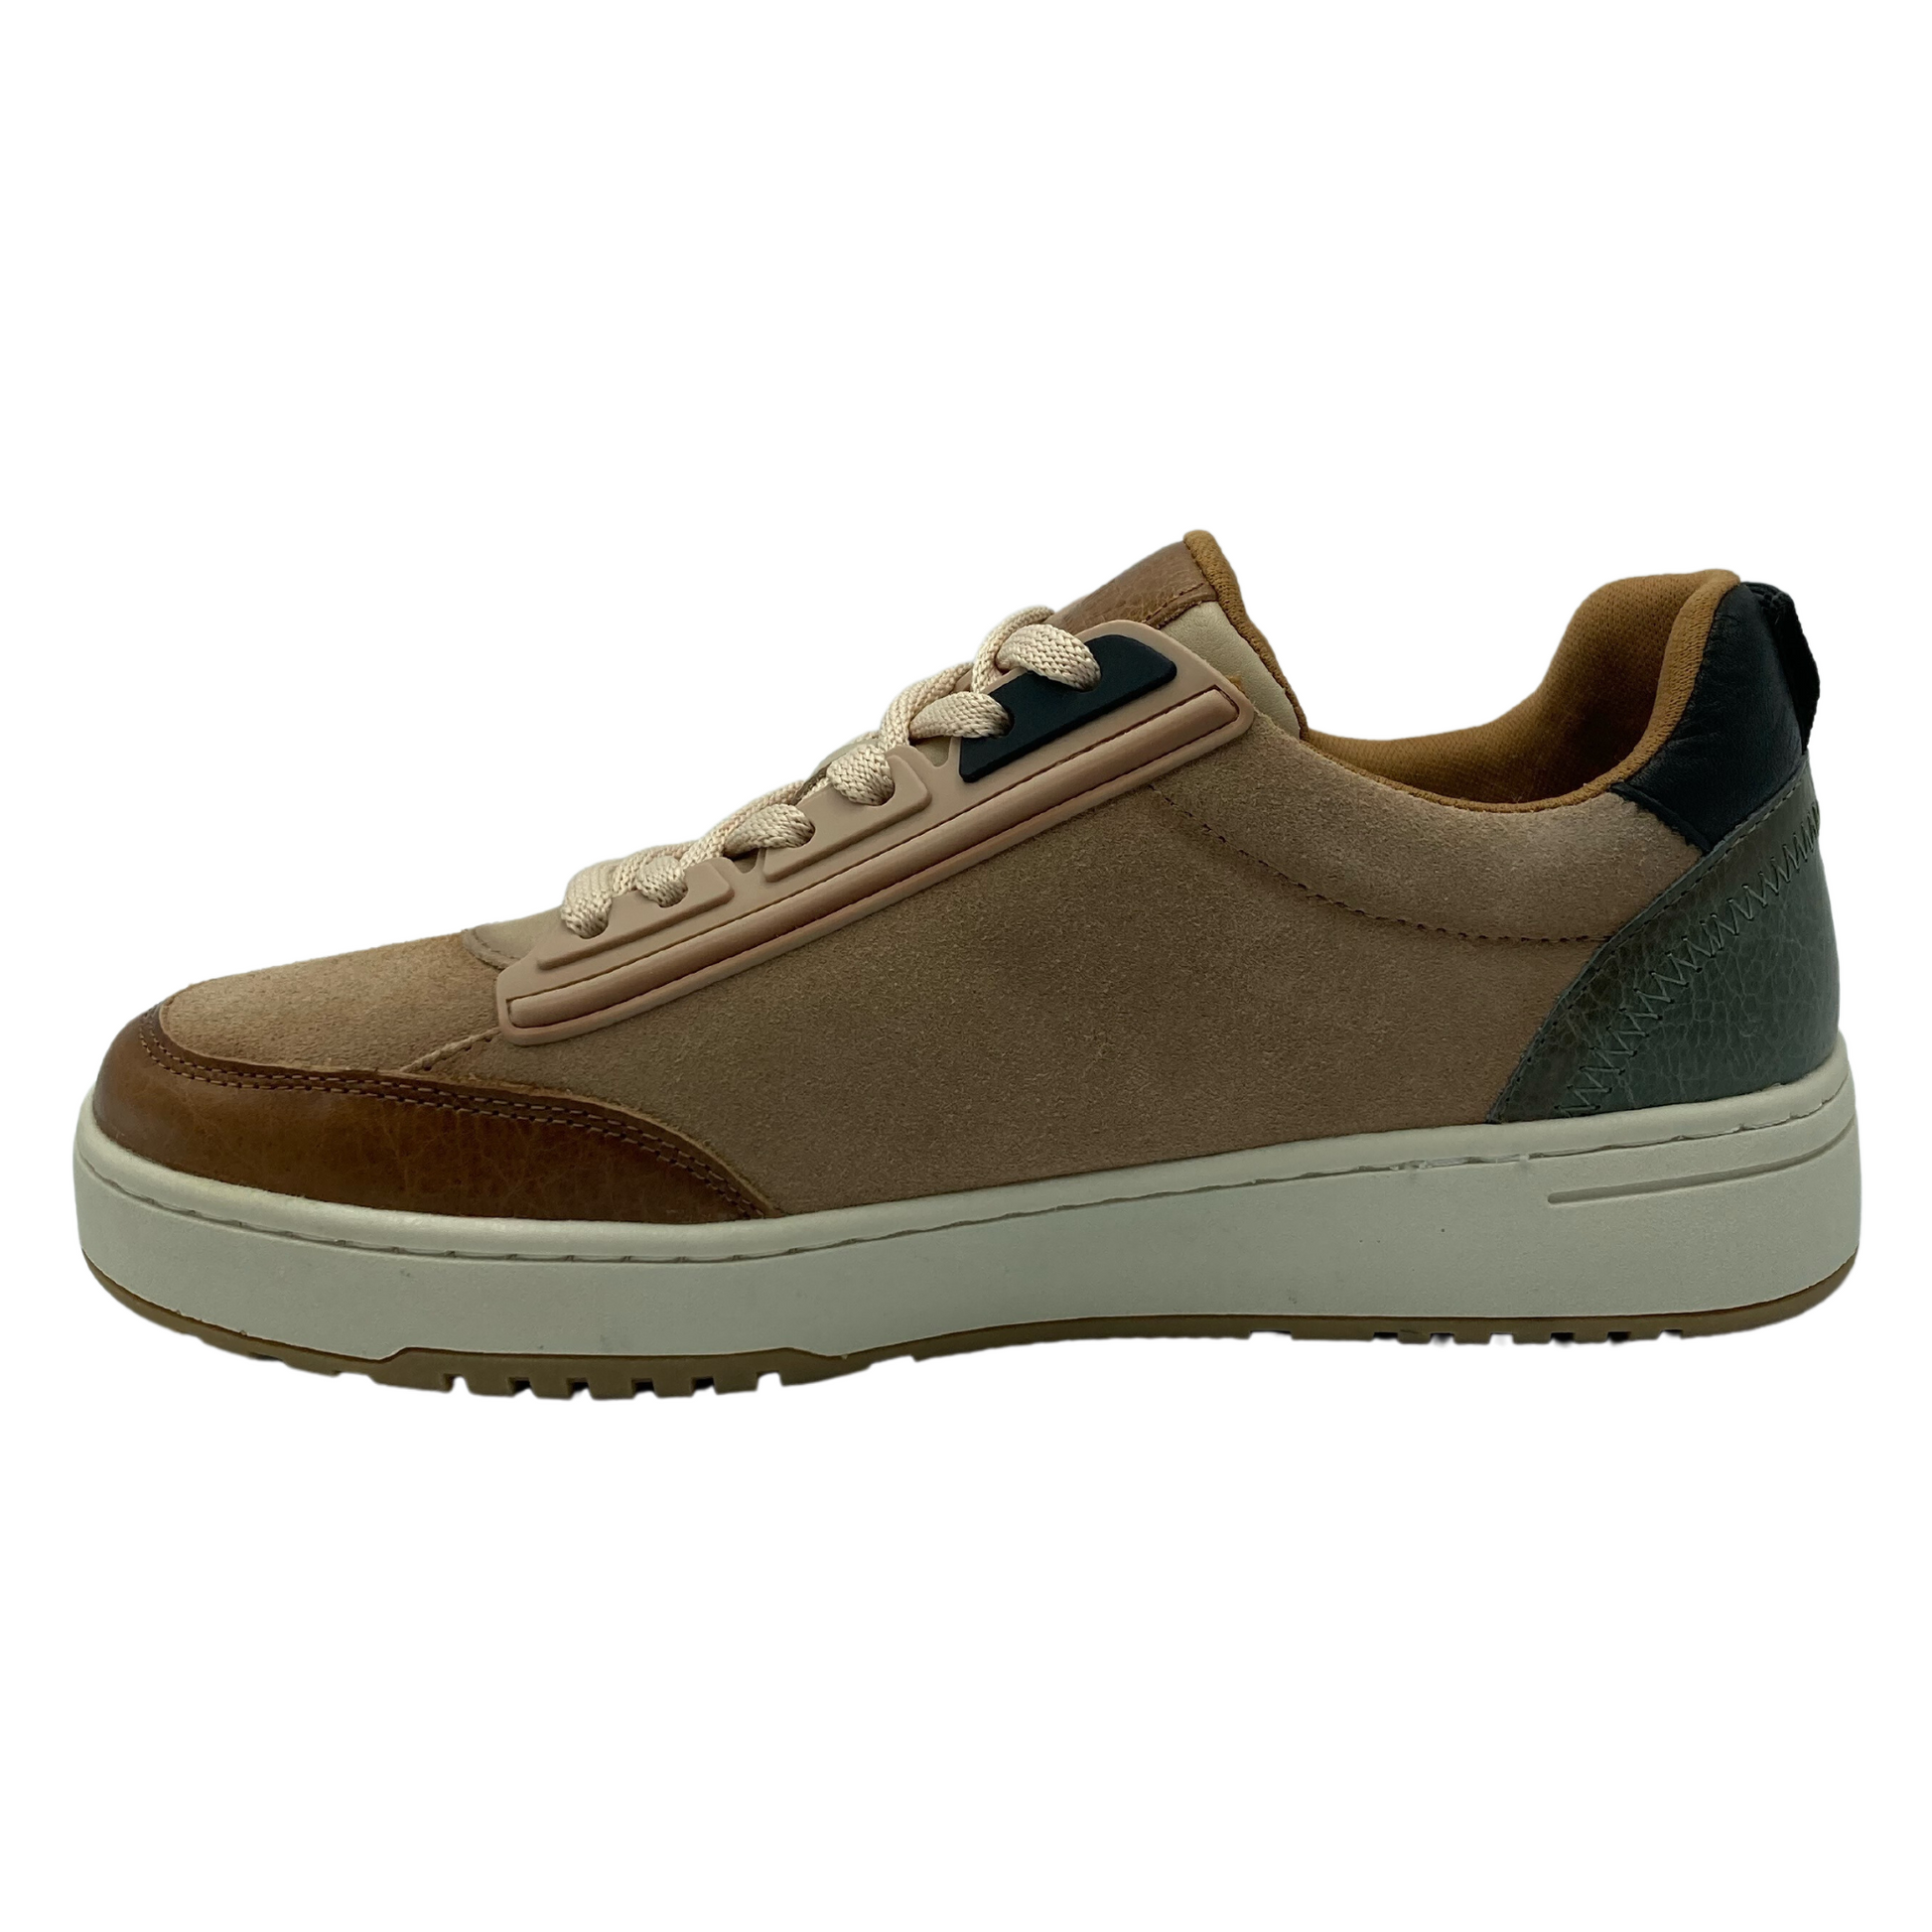 Left facing view of brown and khaki leather sneaker with white rubber outsole